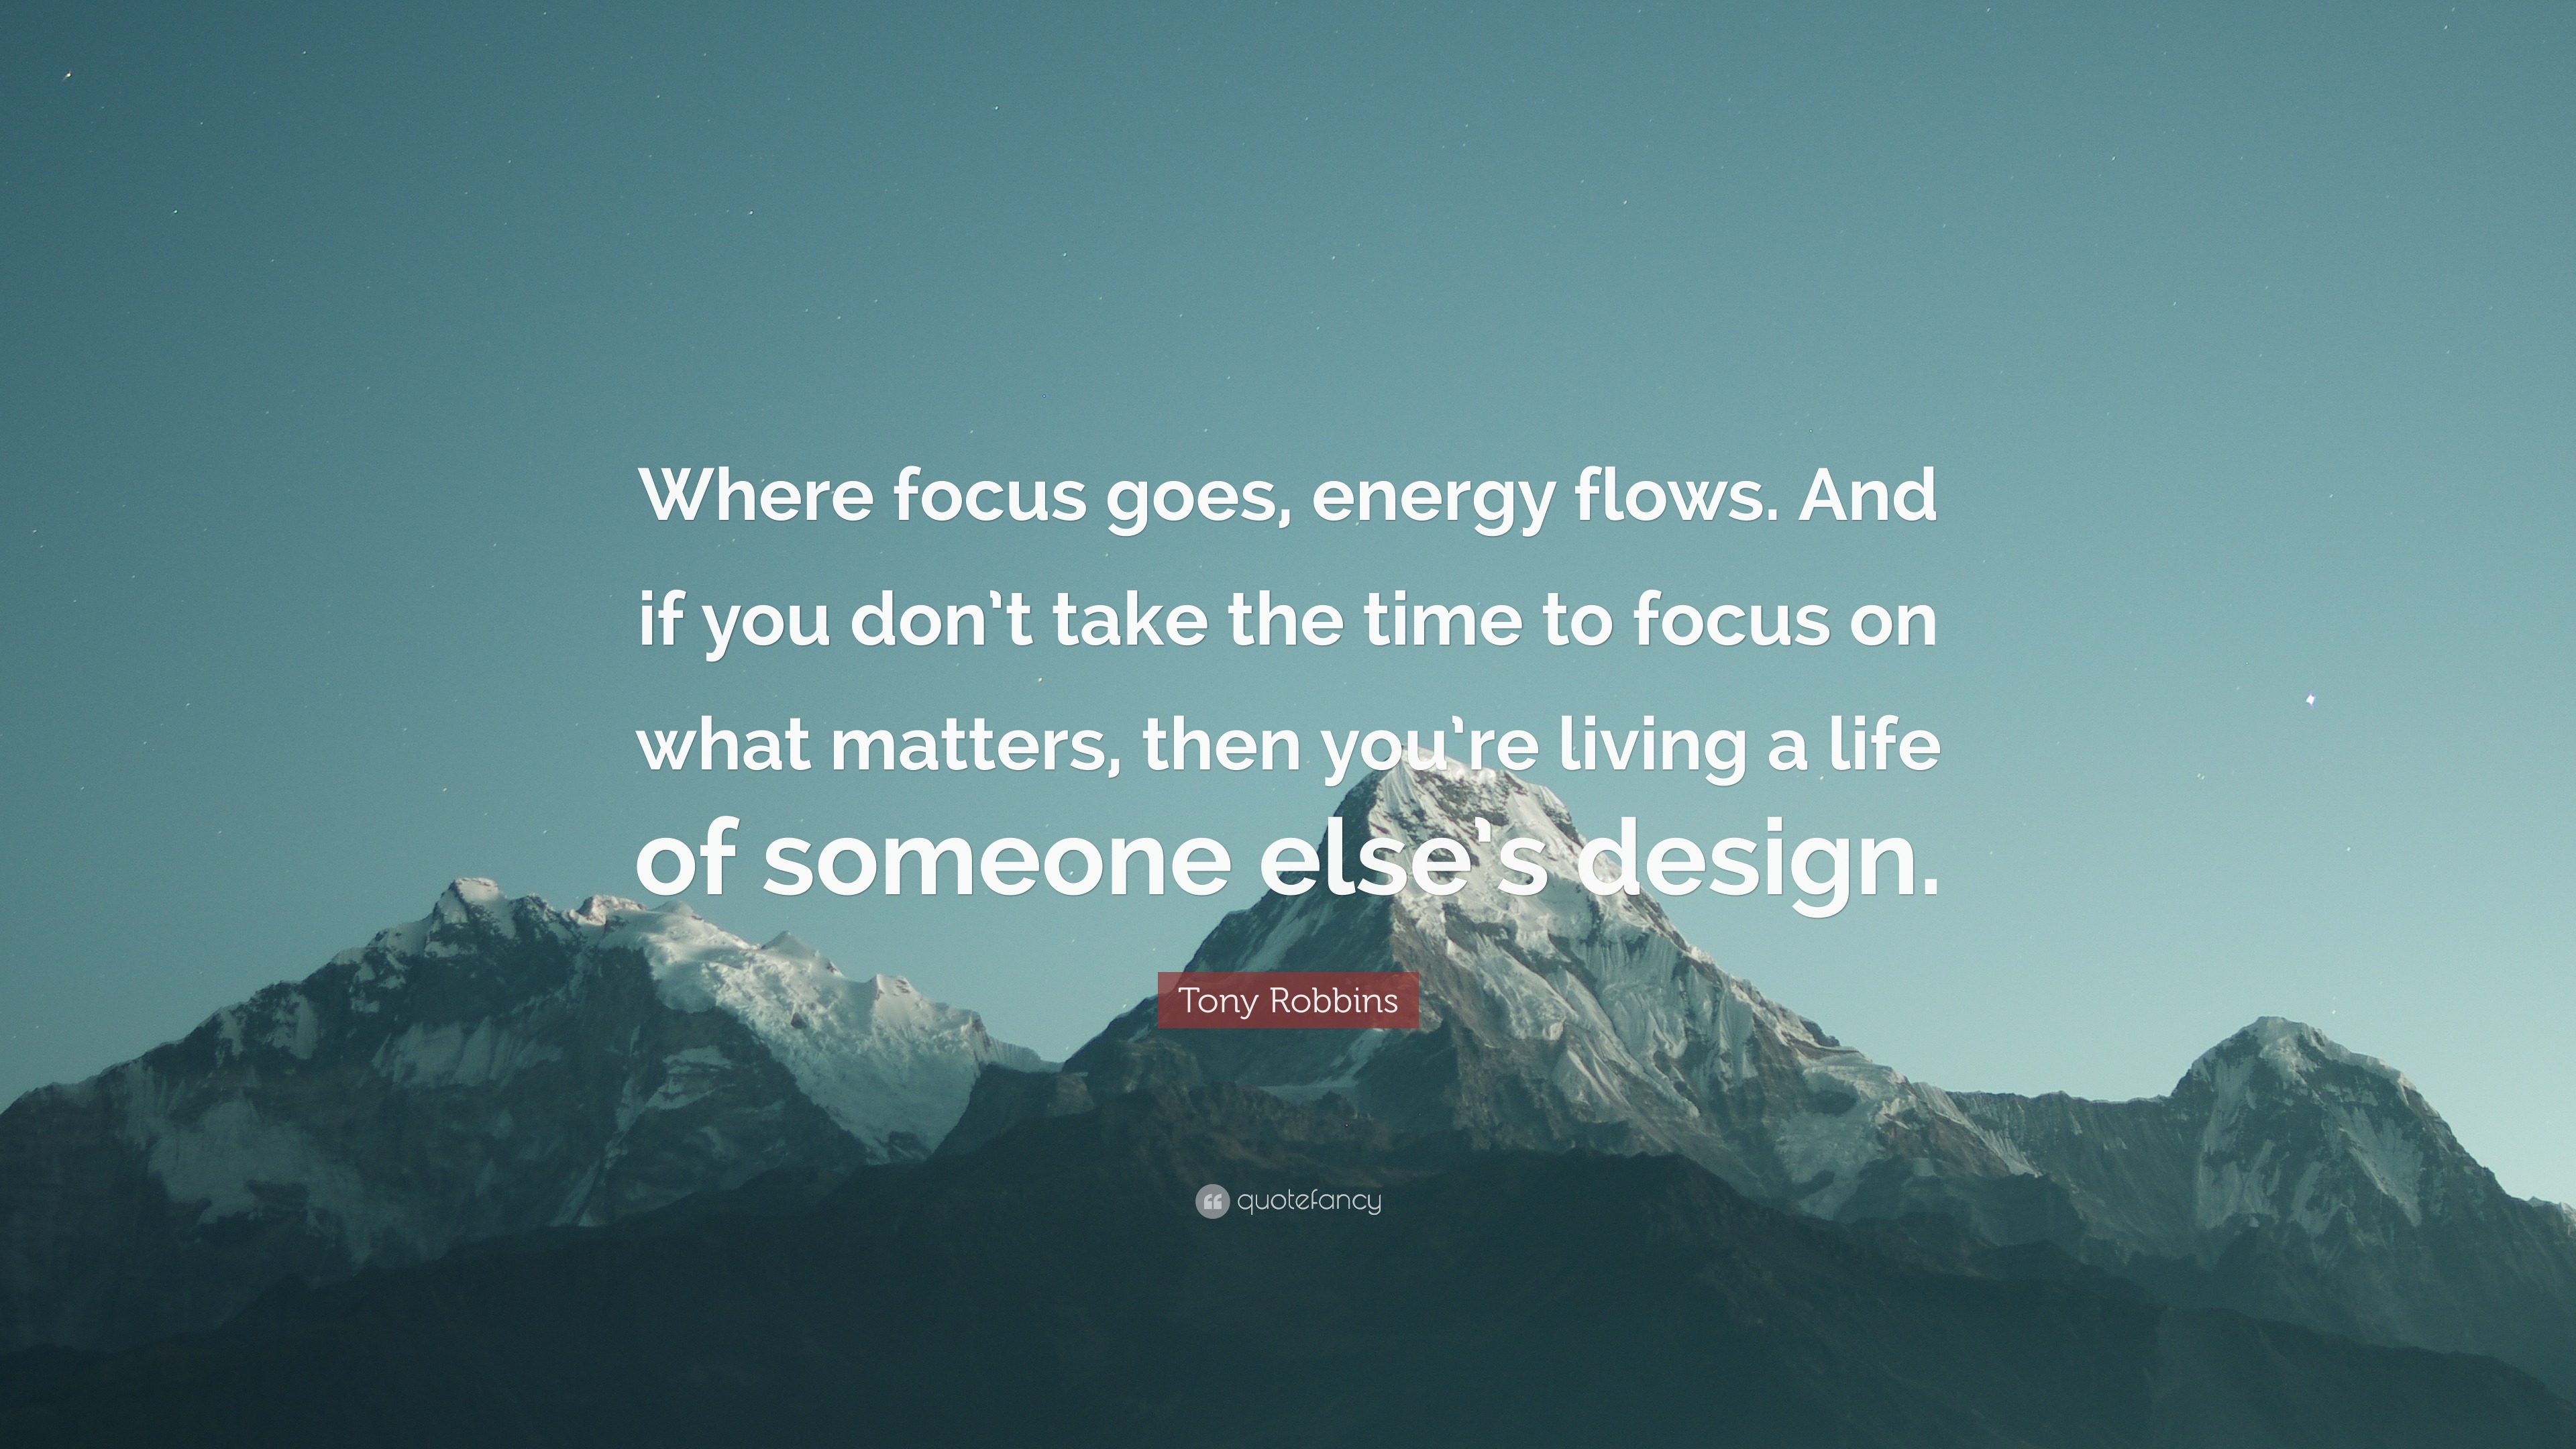 WHERE FOCUS GOES ENERGY FLOWS Frame Motivation Success Poster Quote Life